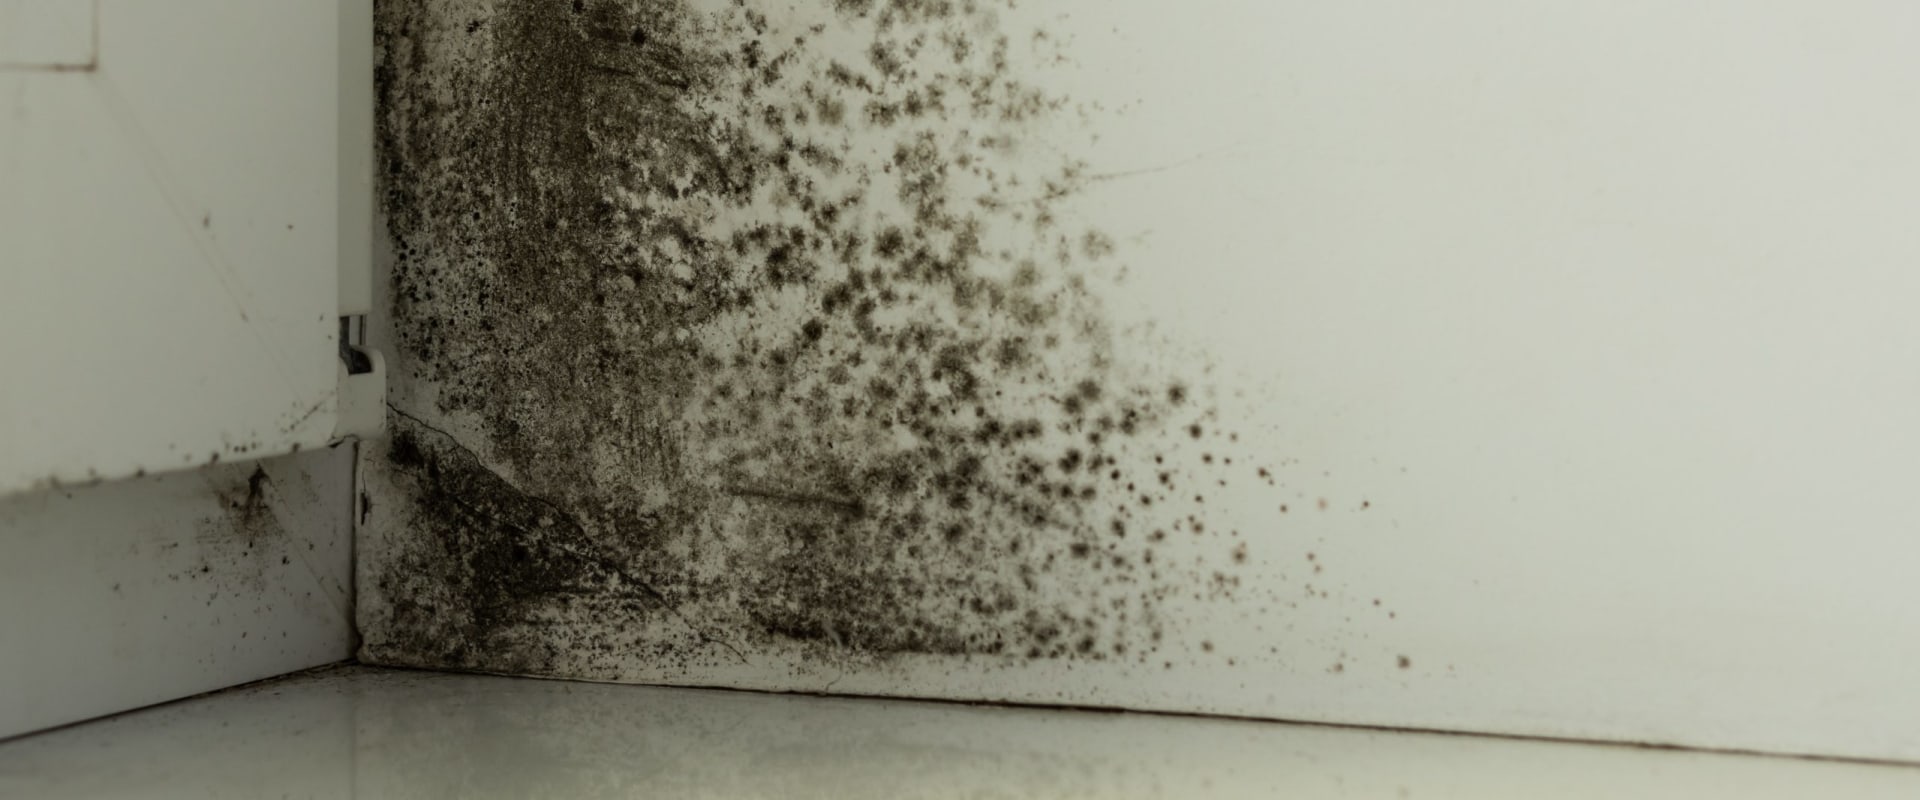 How long does water damage turn into mold?